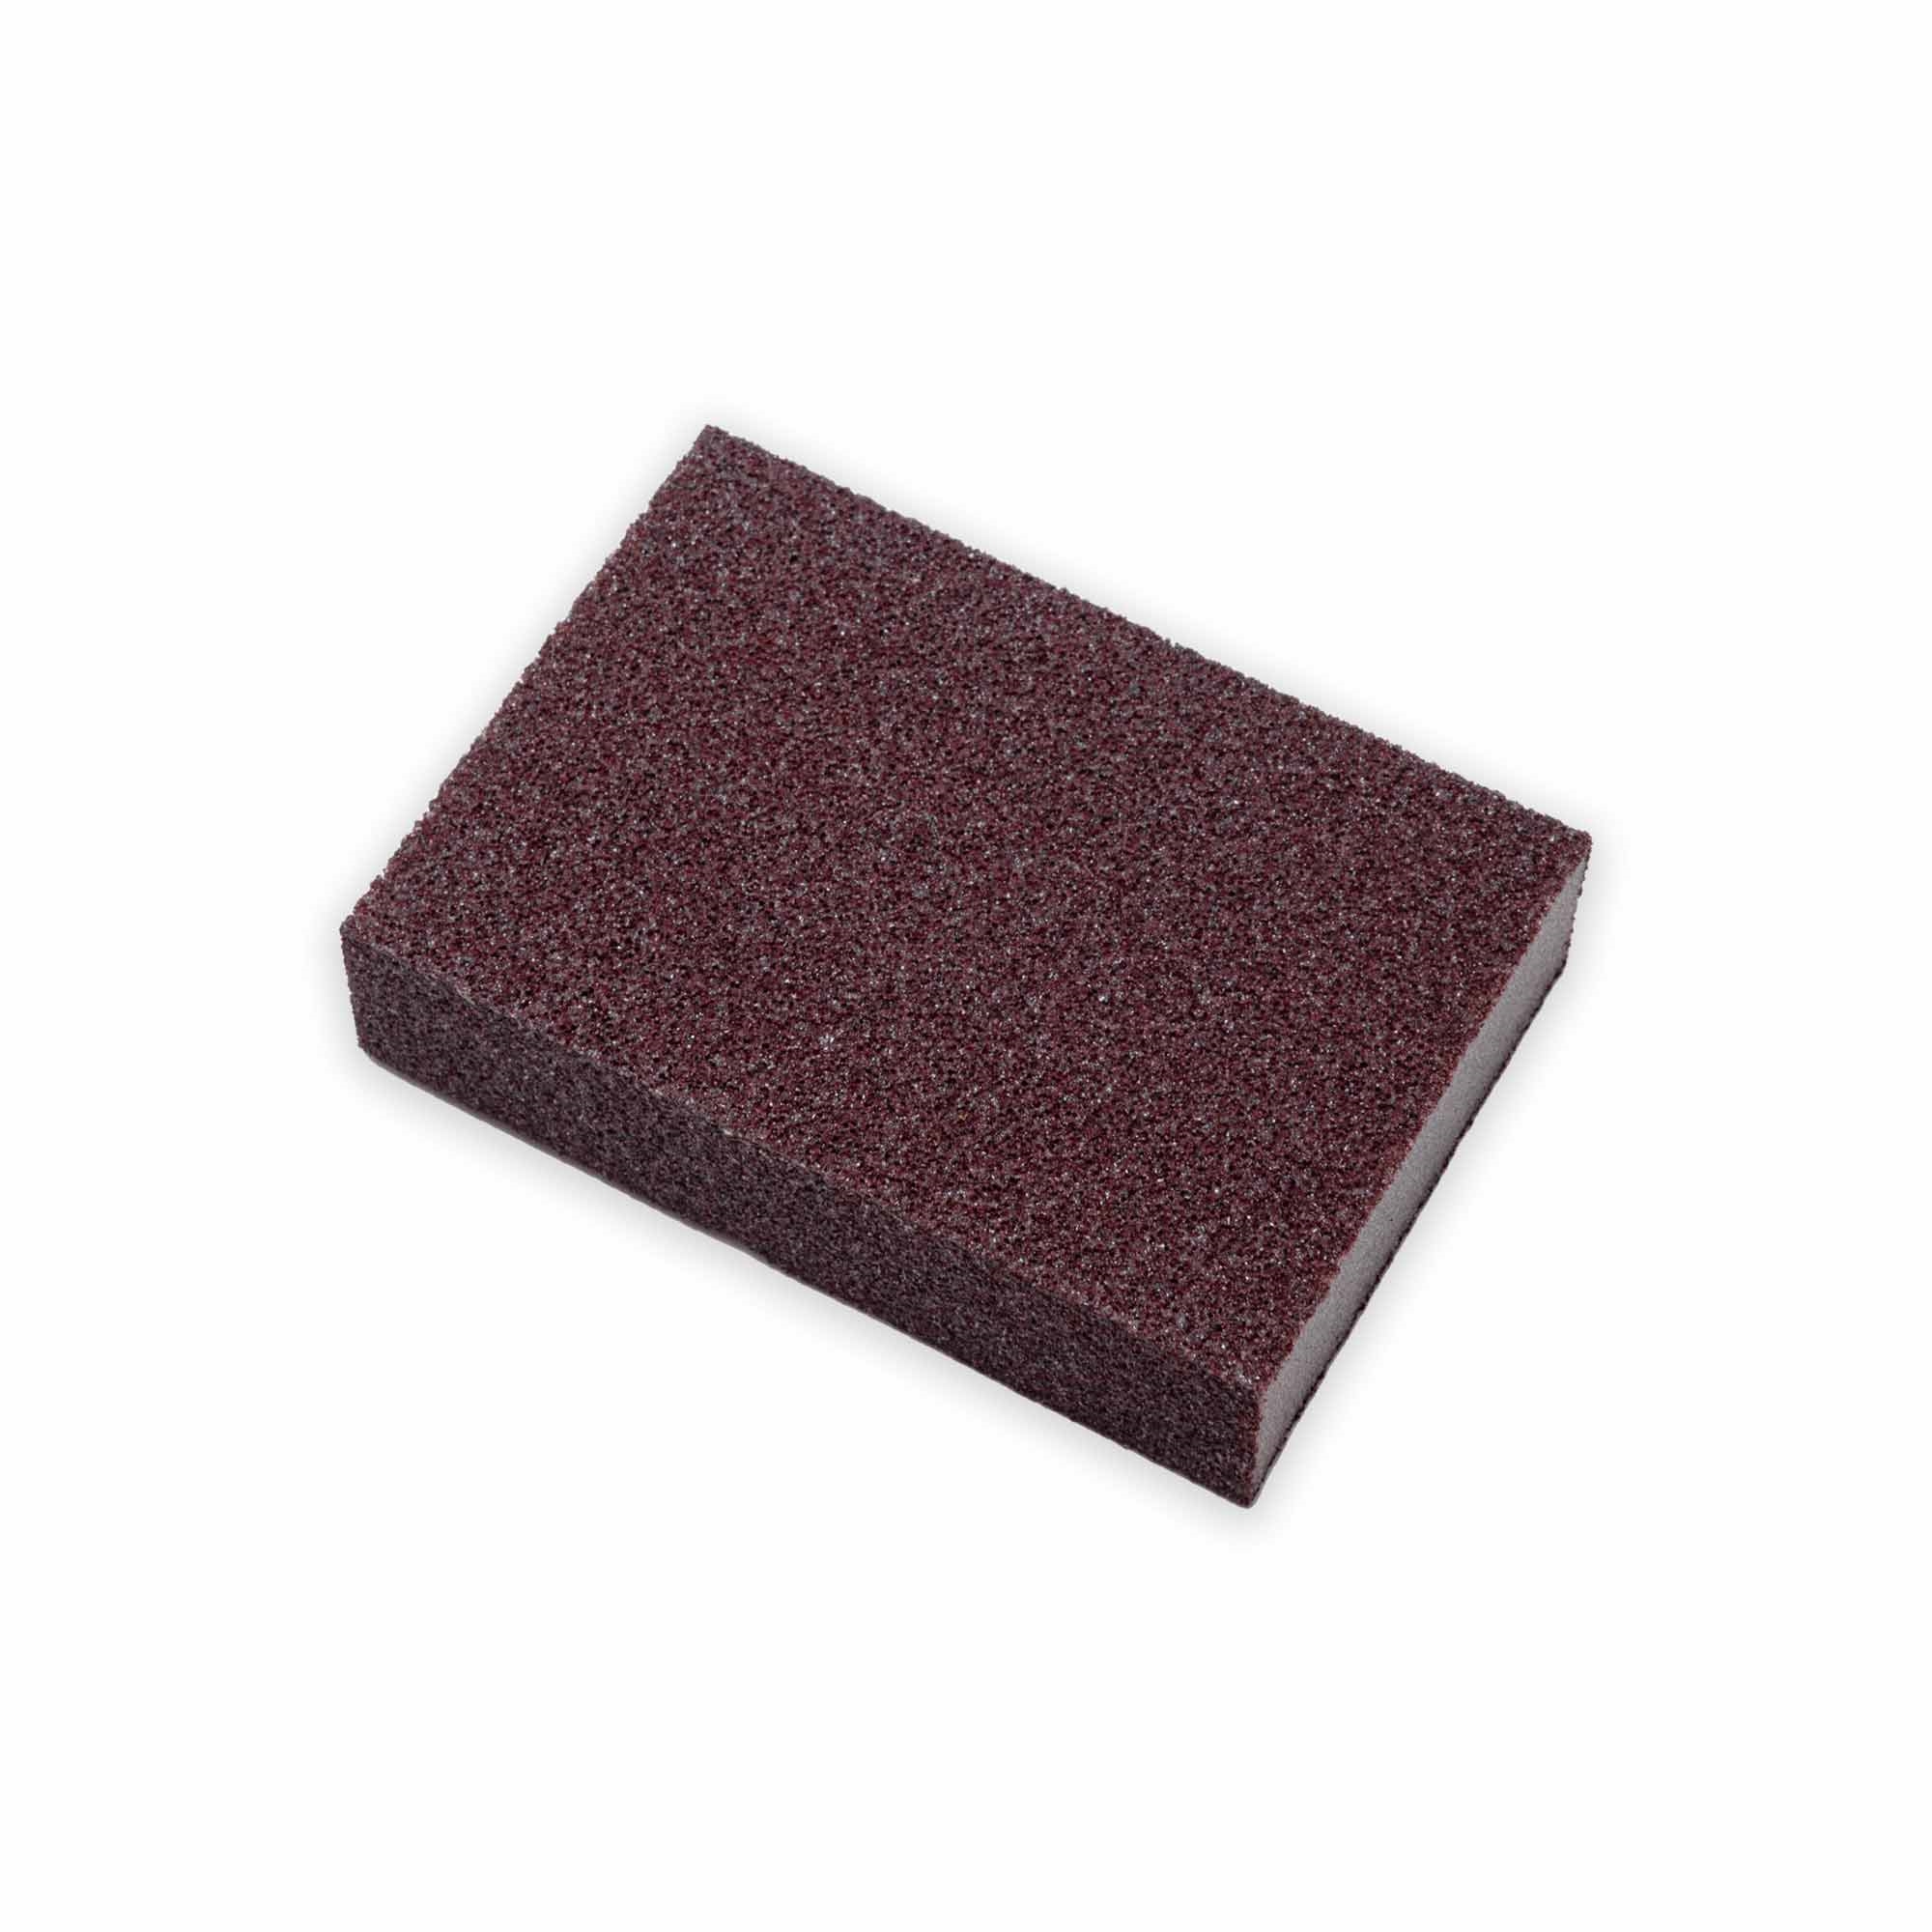 Diamond Sanding Sponge 100 Grit by Chinese Clay Art for Glass and Ceramics